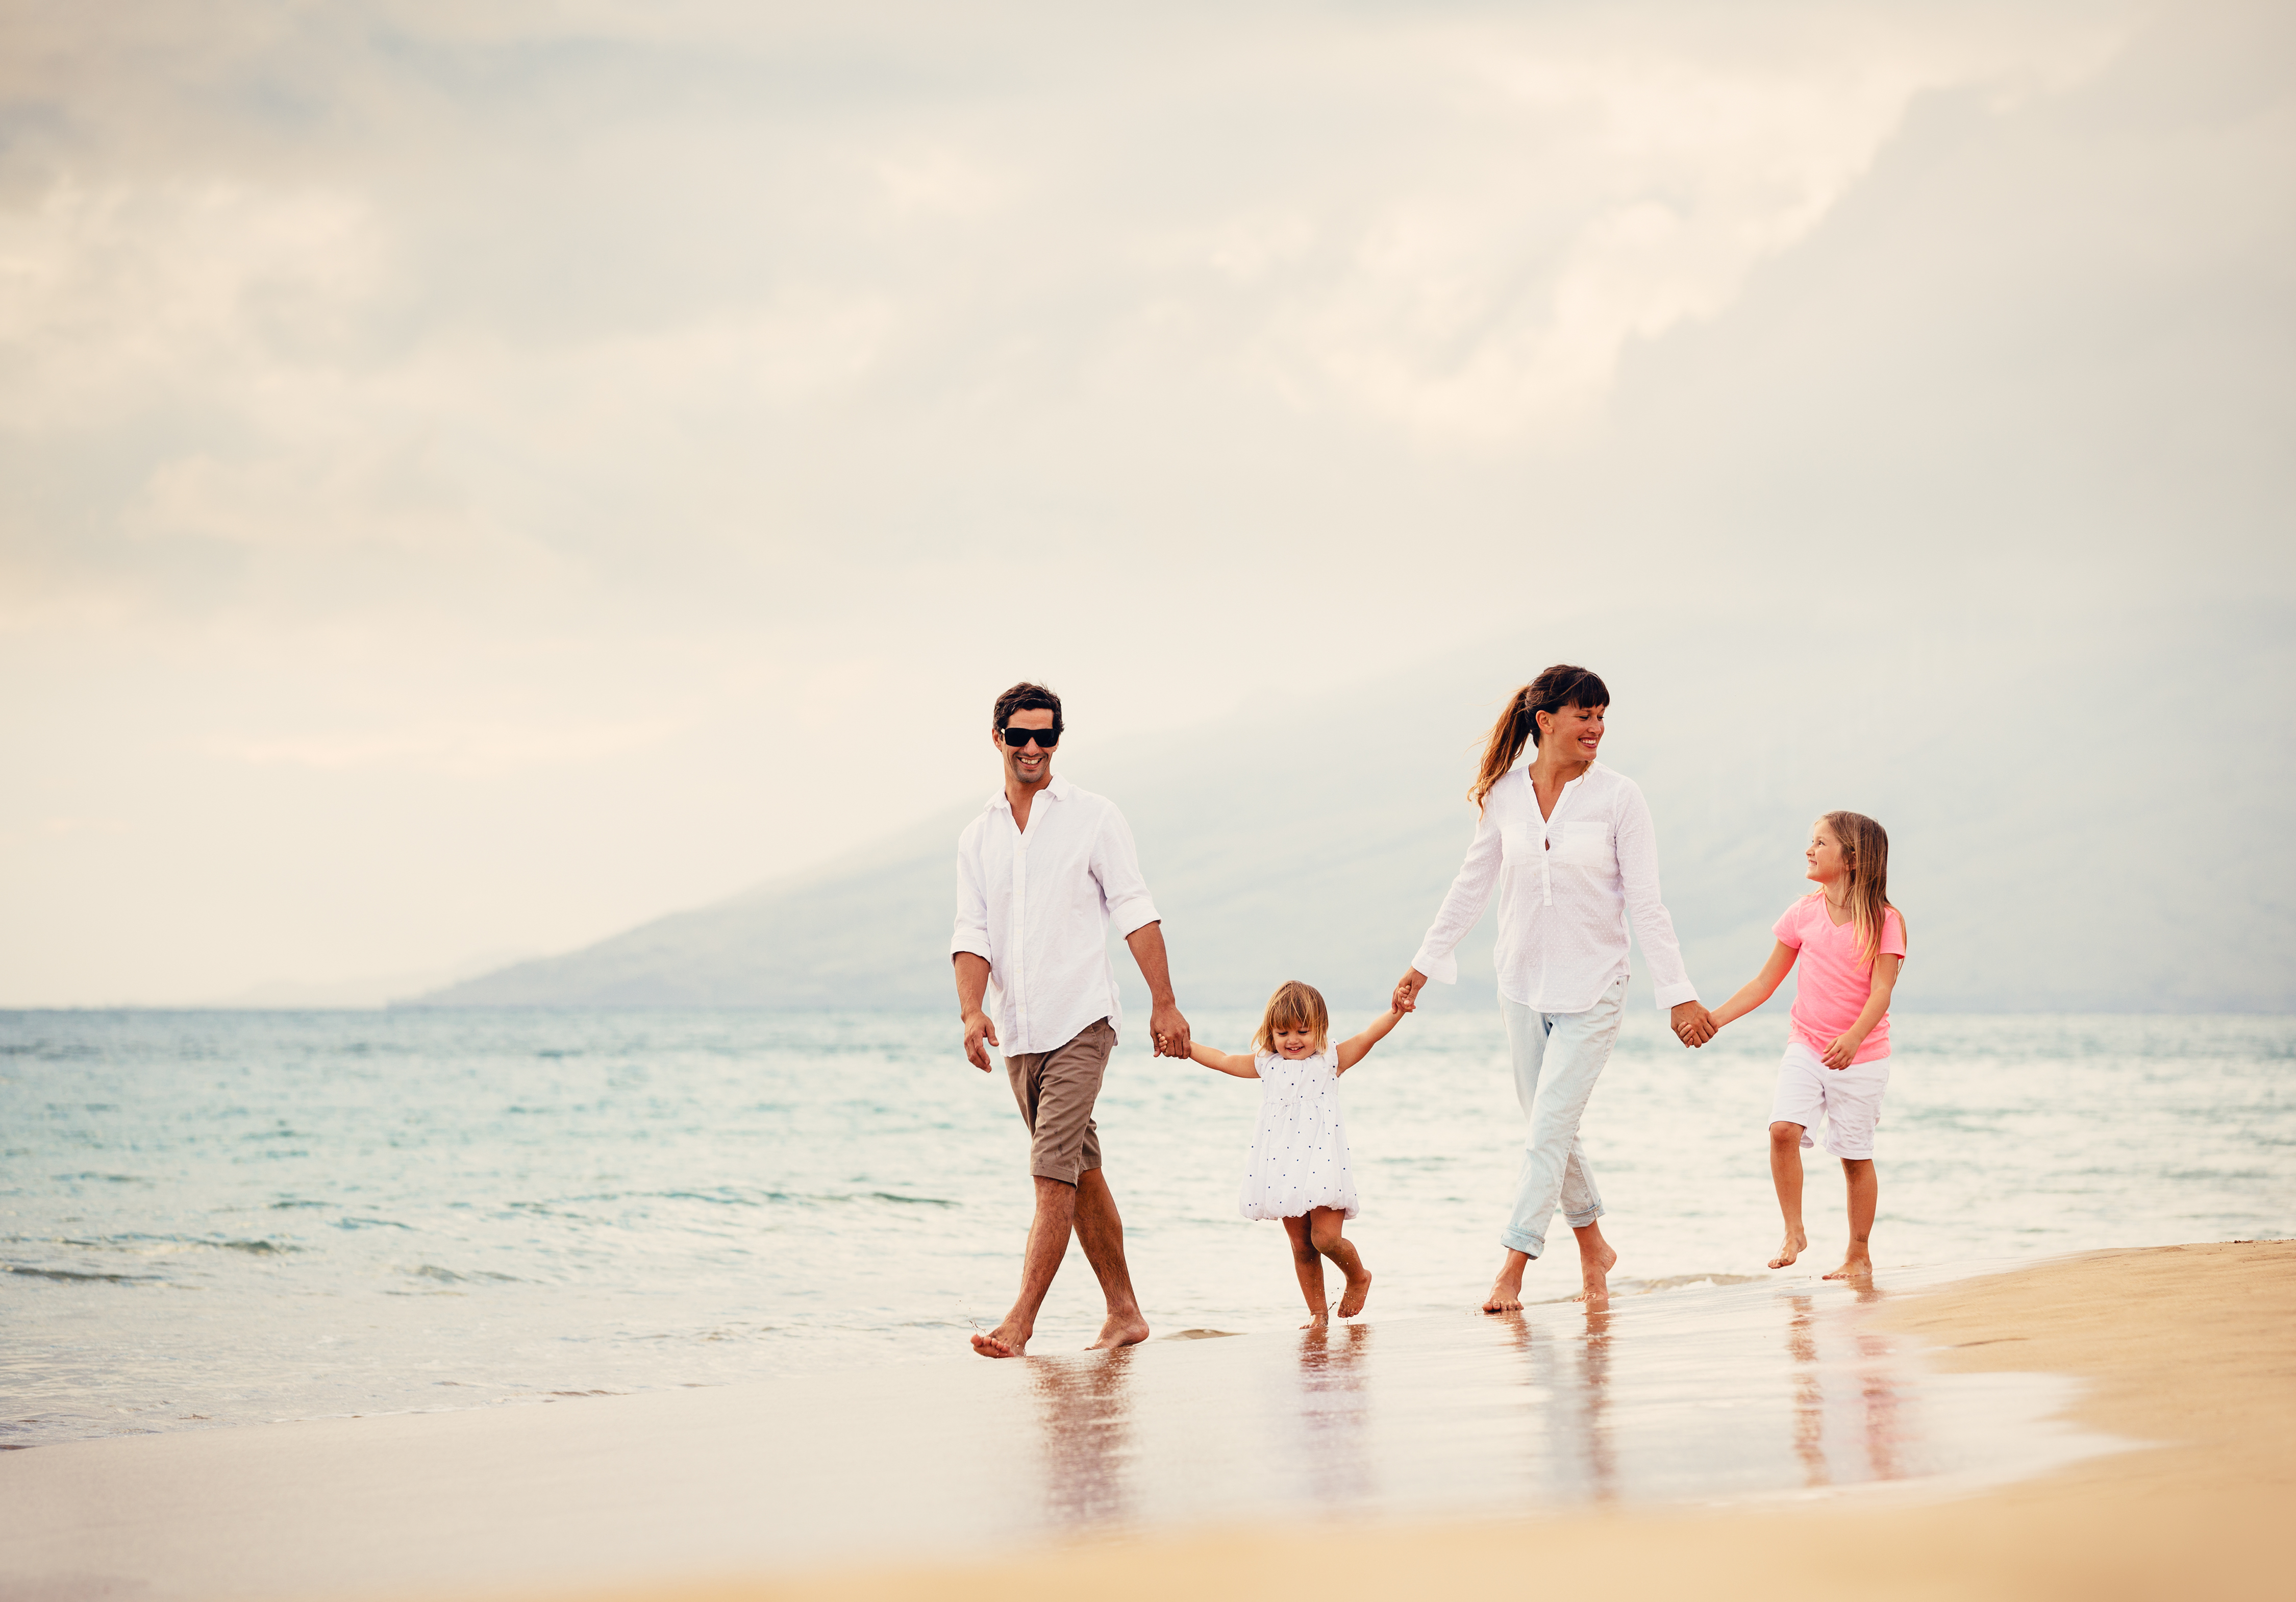 Family Travel Show: Picture courtesy of Shutterstock